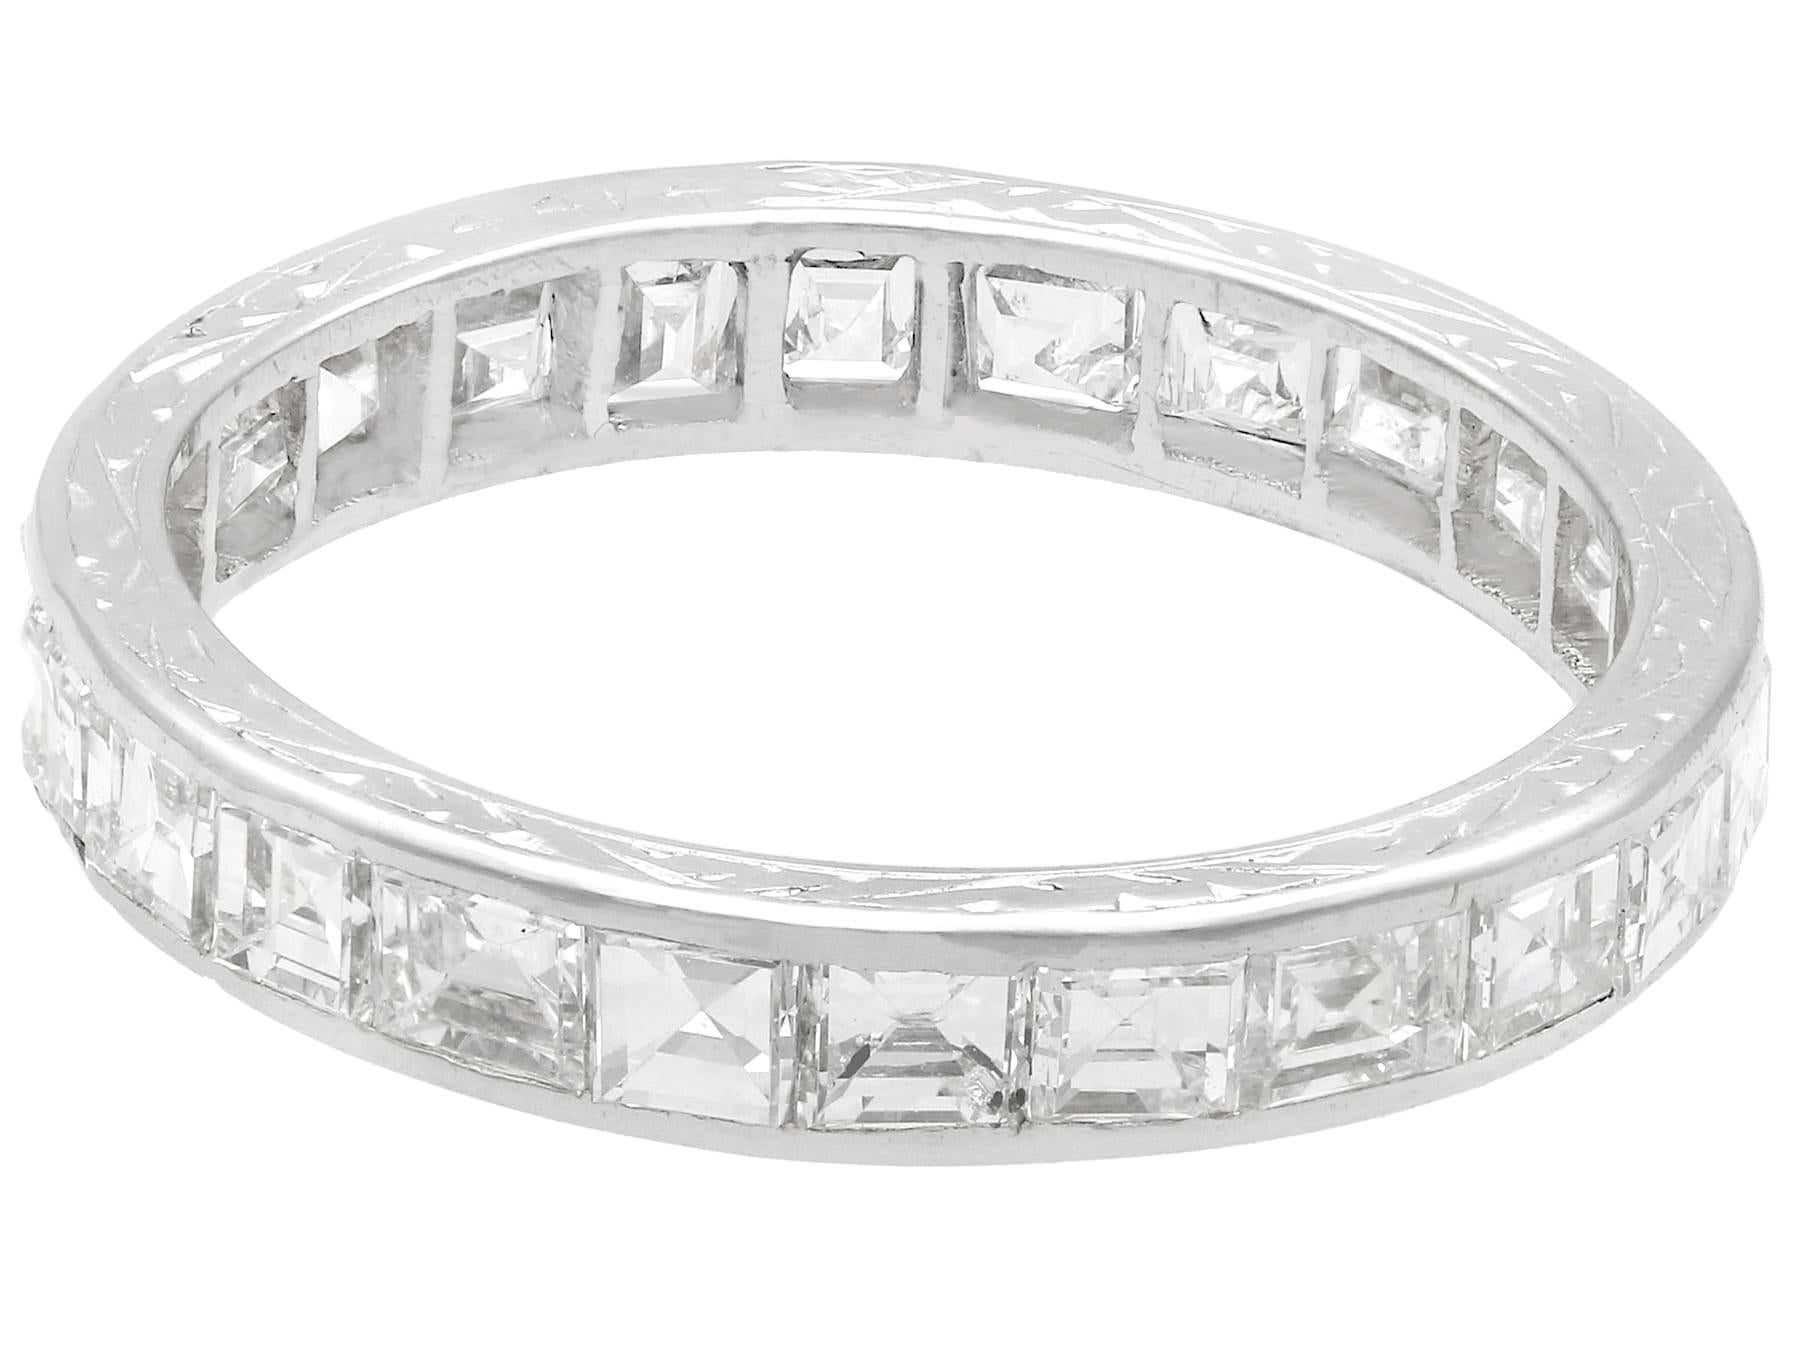 1940s 2.16 Carat Diamond and Platinum Full Eternity Ring In Good Condition For Sale In Jesmond, Newcastle Upon Tyne